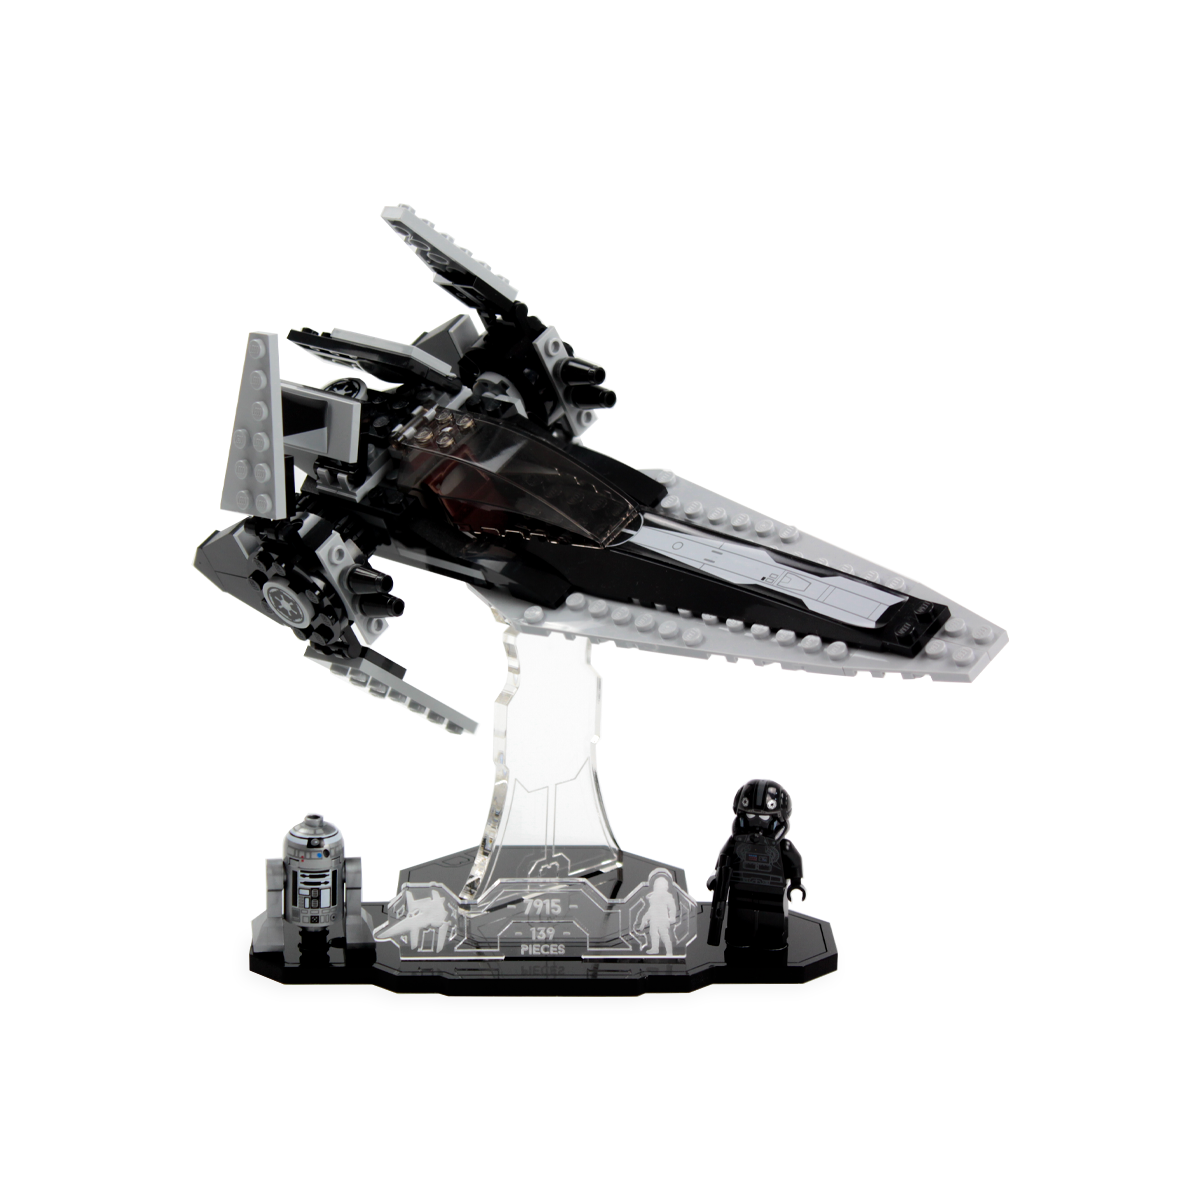 Display stand for Star Wars™ Imperial V-Wing (7915) — Brick